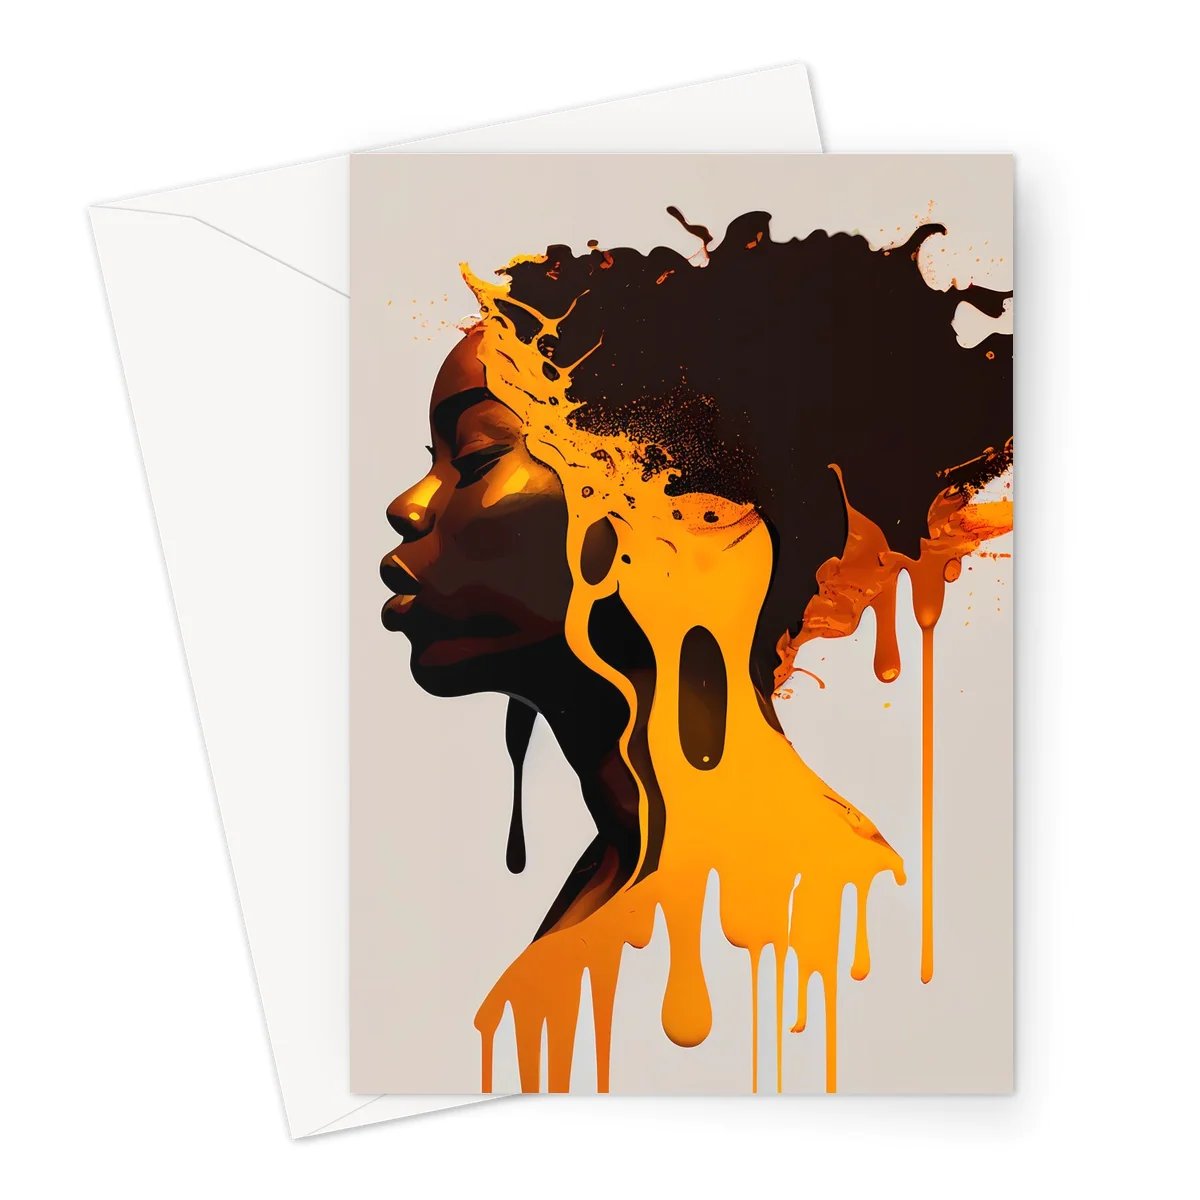 Able – Black Greeting Card